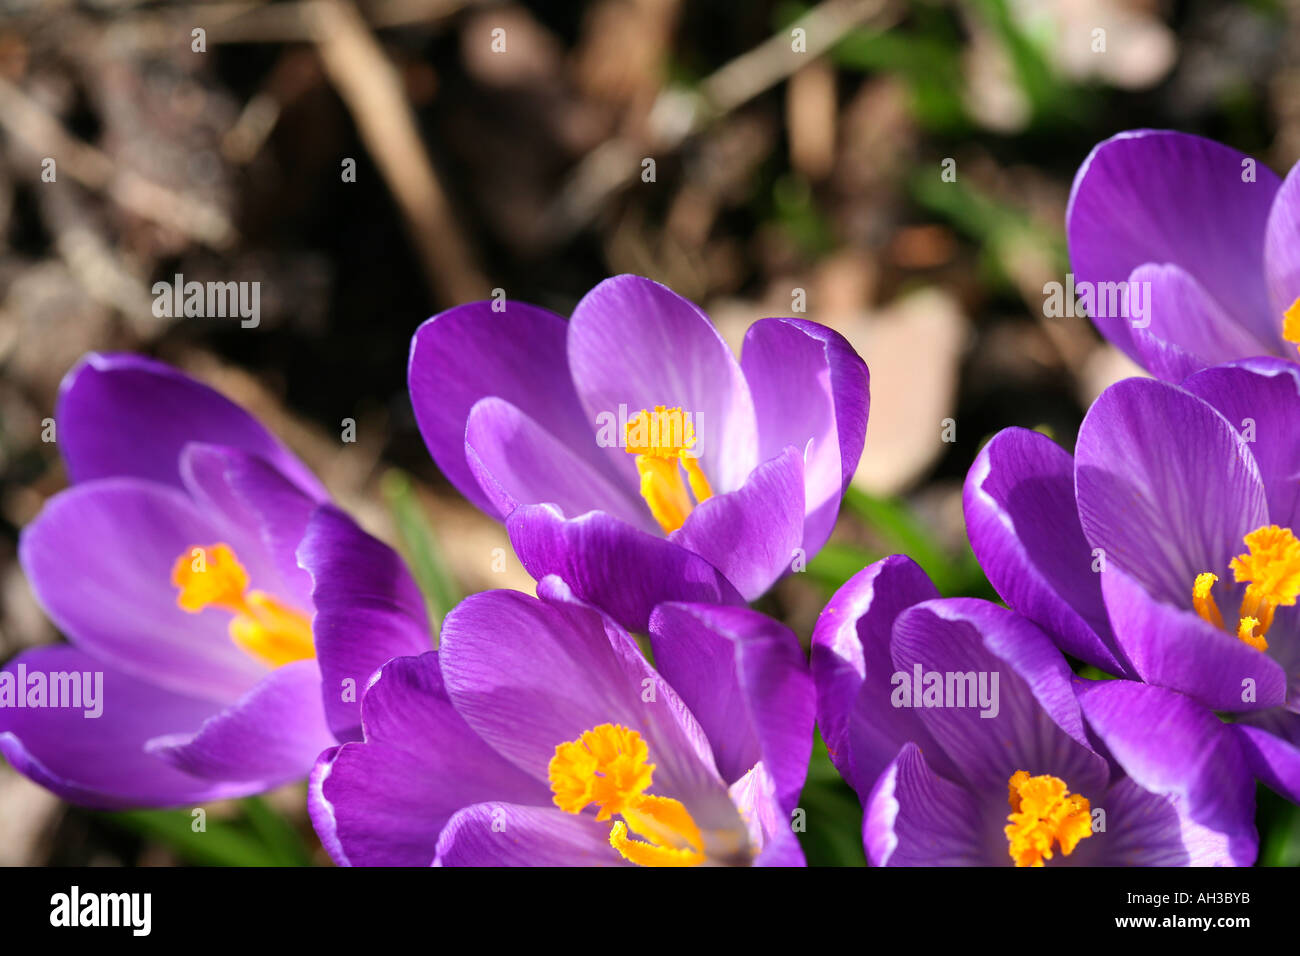 Close-up macro photograph of beautiful fresh blooming purple and violet crocus flowers with bright orange pistils in early spring natural garden Stock Photo